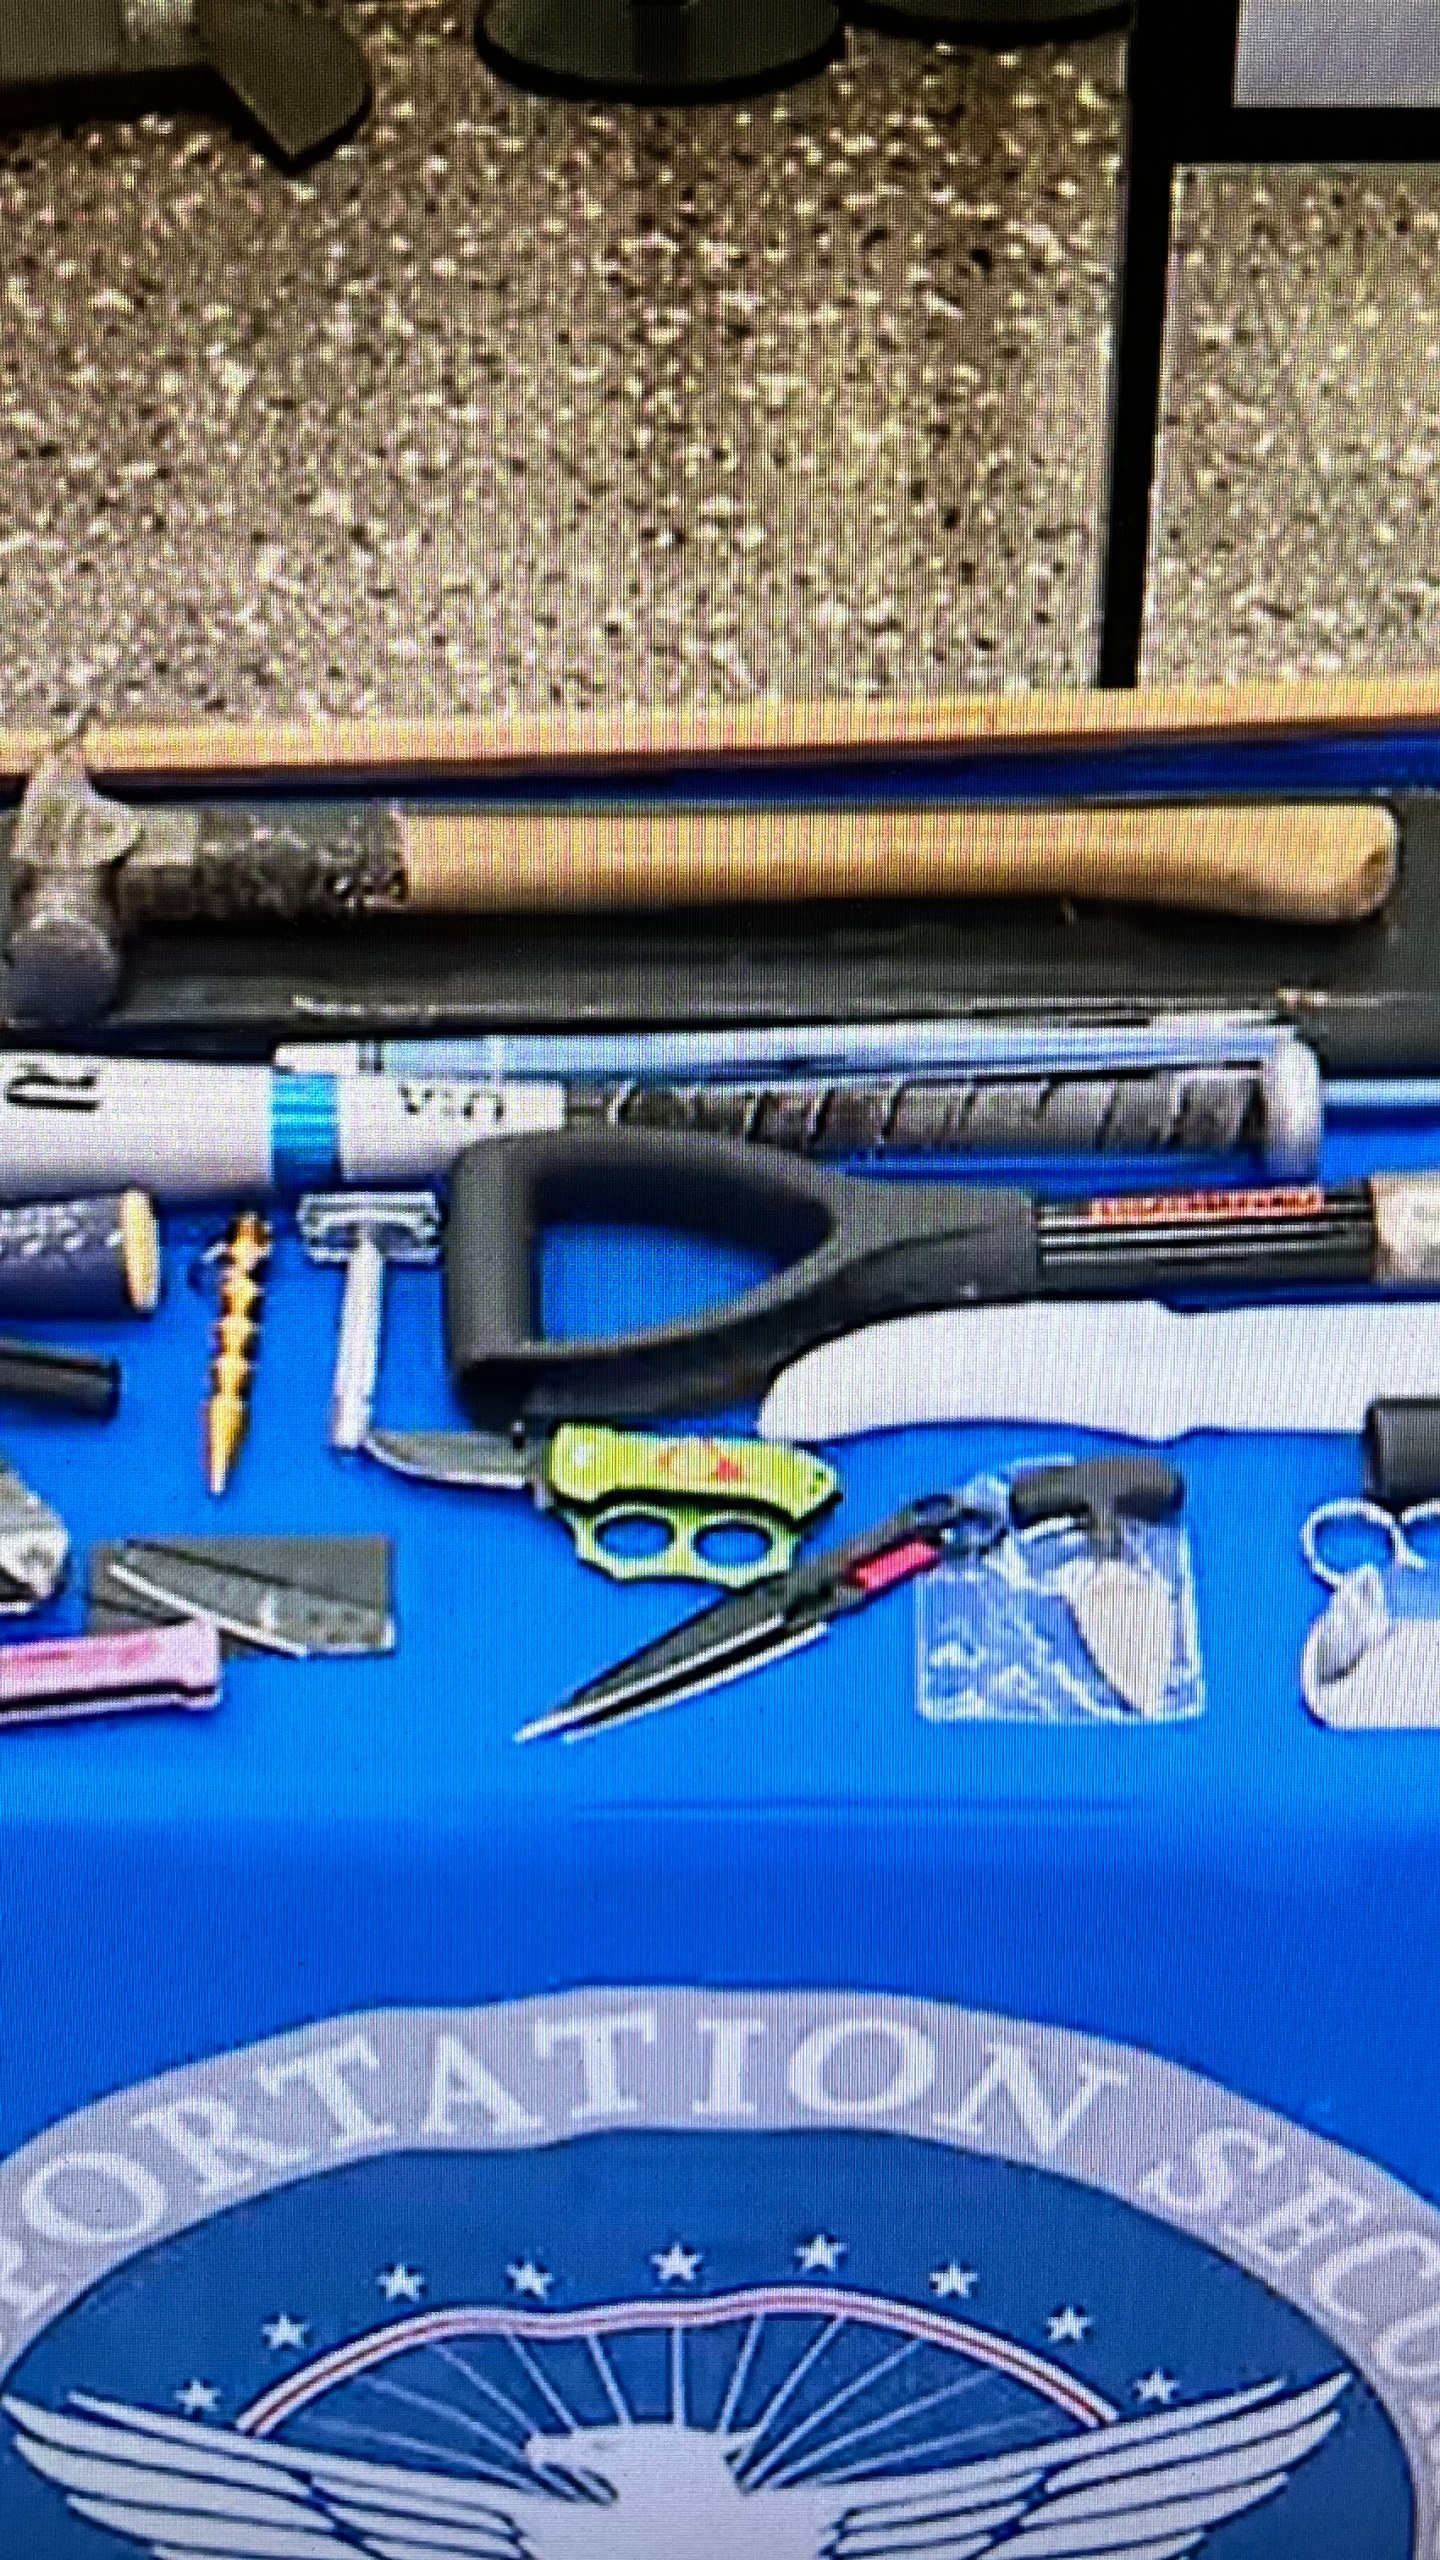 On Thursday, June 1, 2023, a photo shows confiscated items from TSA checkpoints at Daniel K. Inouye International Airport in Honolulu, Hawaiʻi.